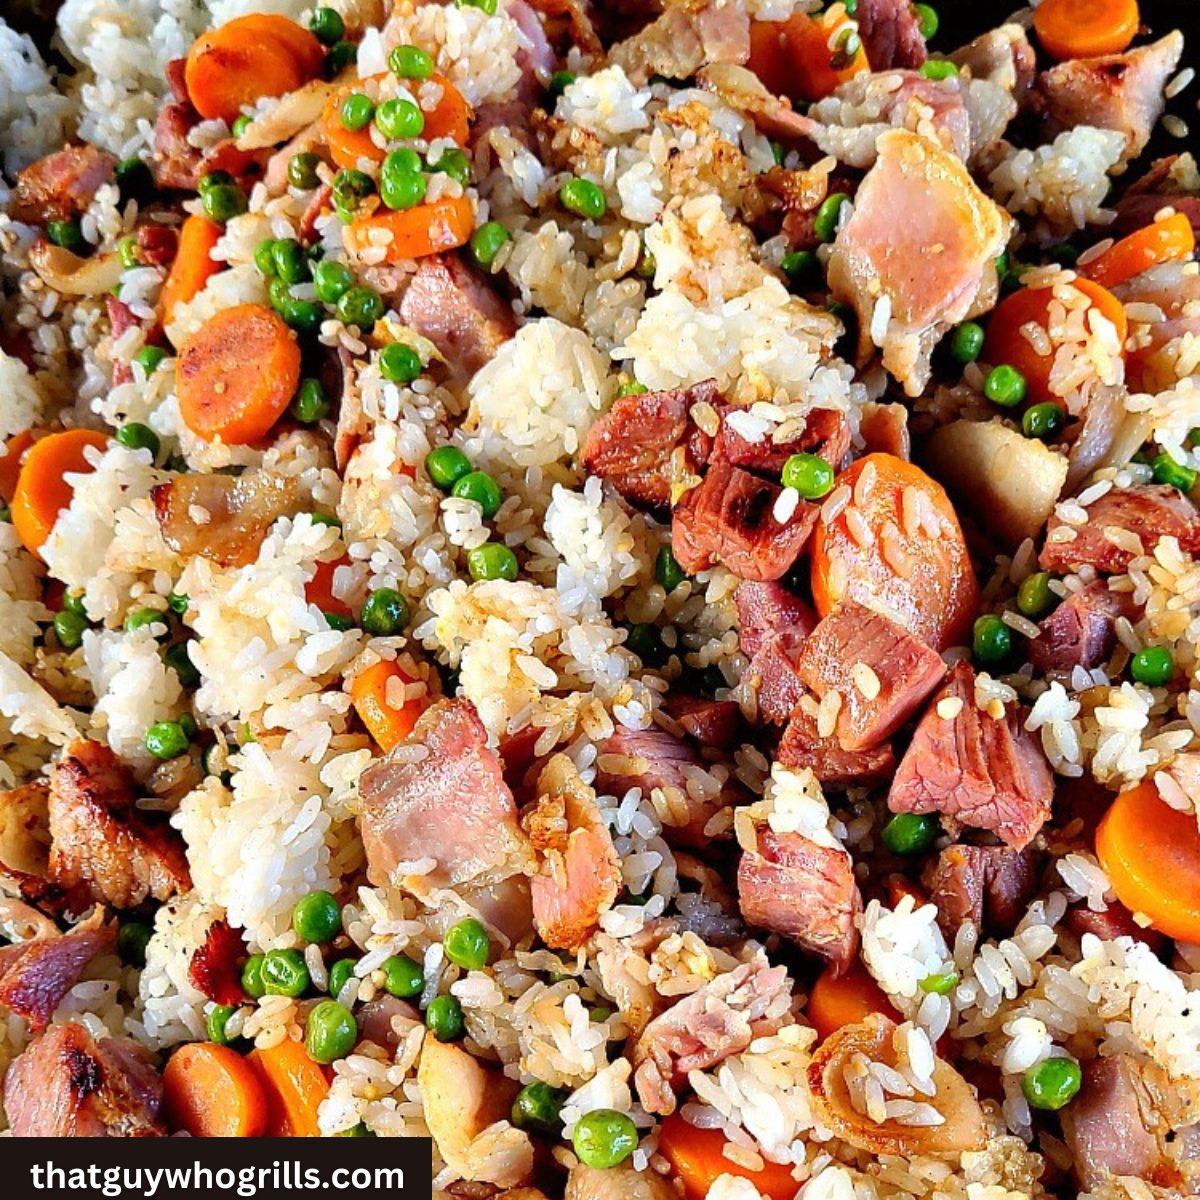 Leftover Smoked Ham Used to Make Fried Rice on the Blackstone with white rice, peas, carrots, bacon, and eggs.